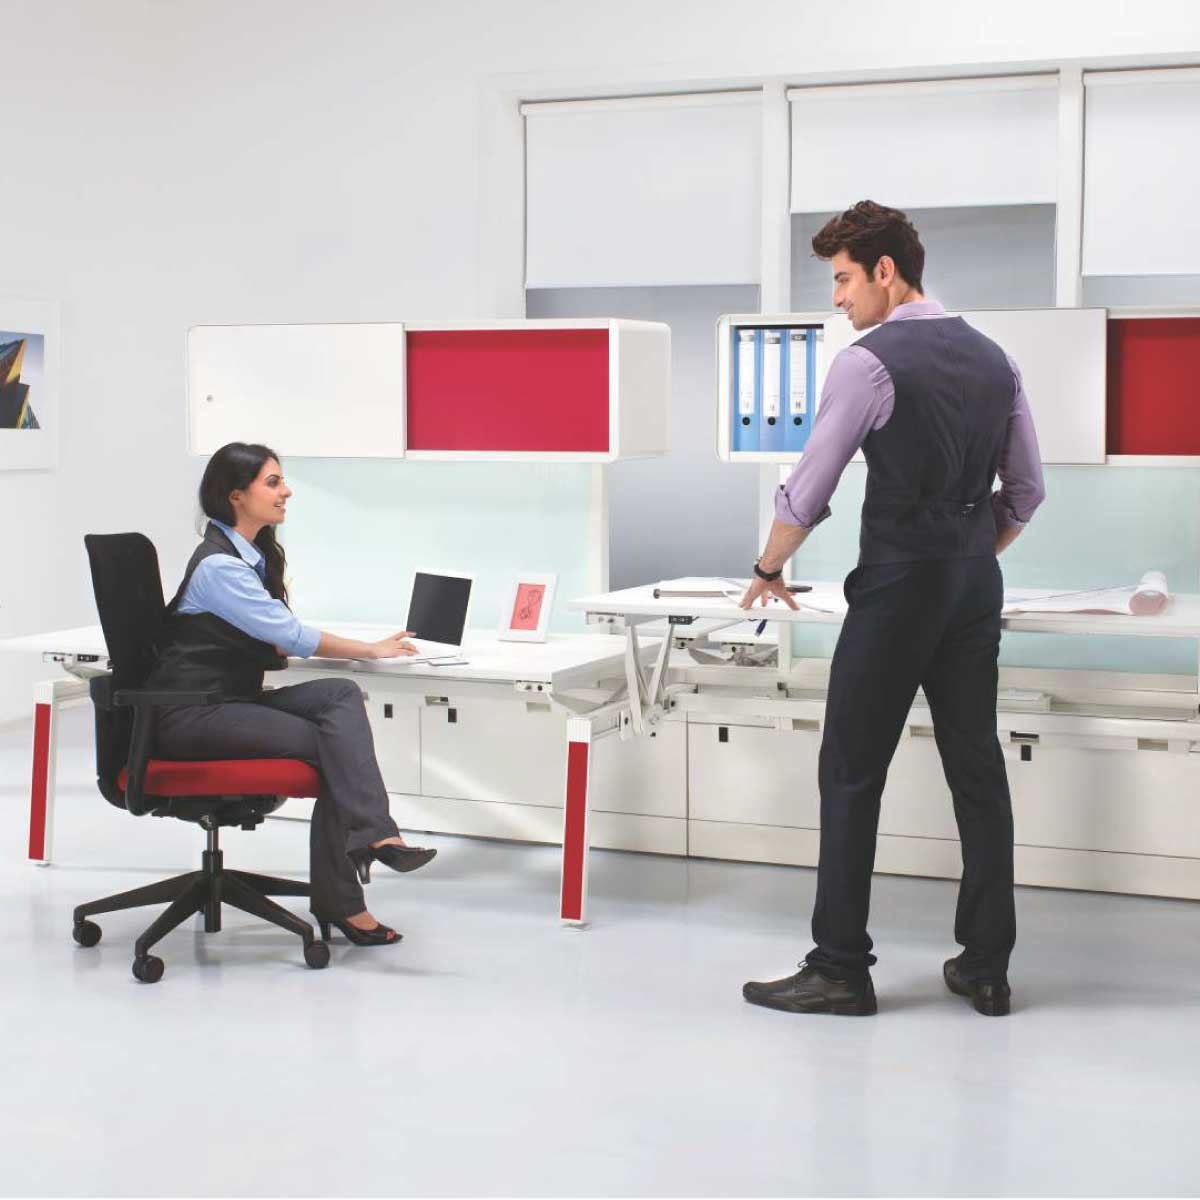 Adjustable Workstations Manufacturers, Suppliers in Faridabad Sector 21a